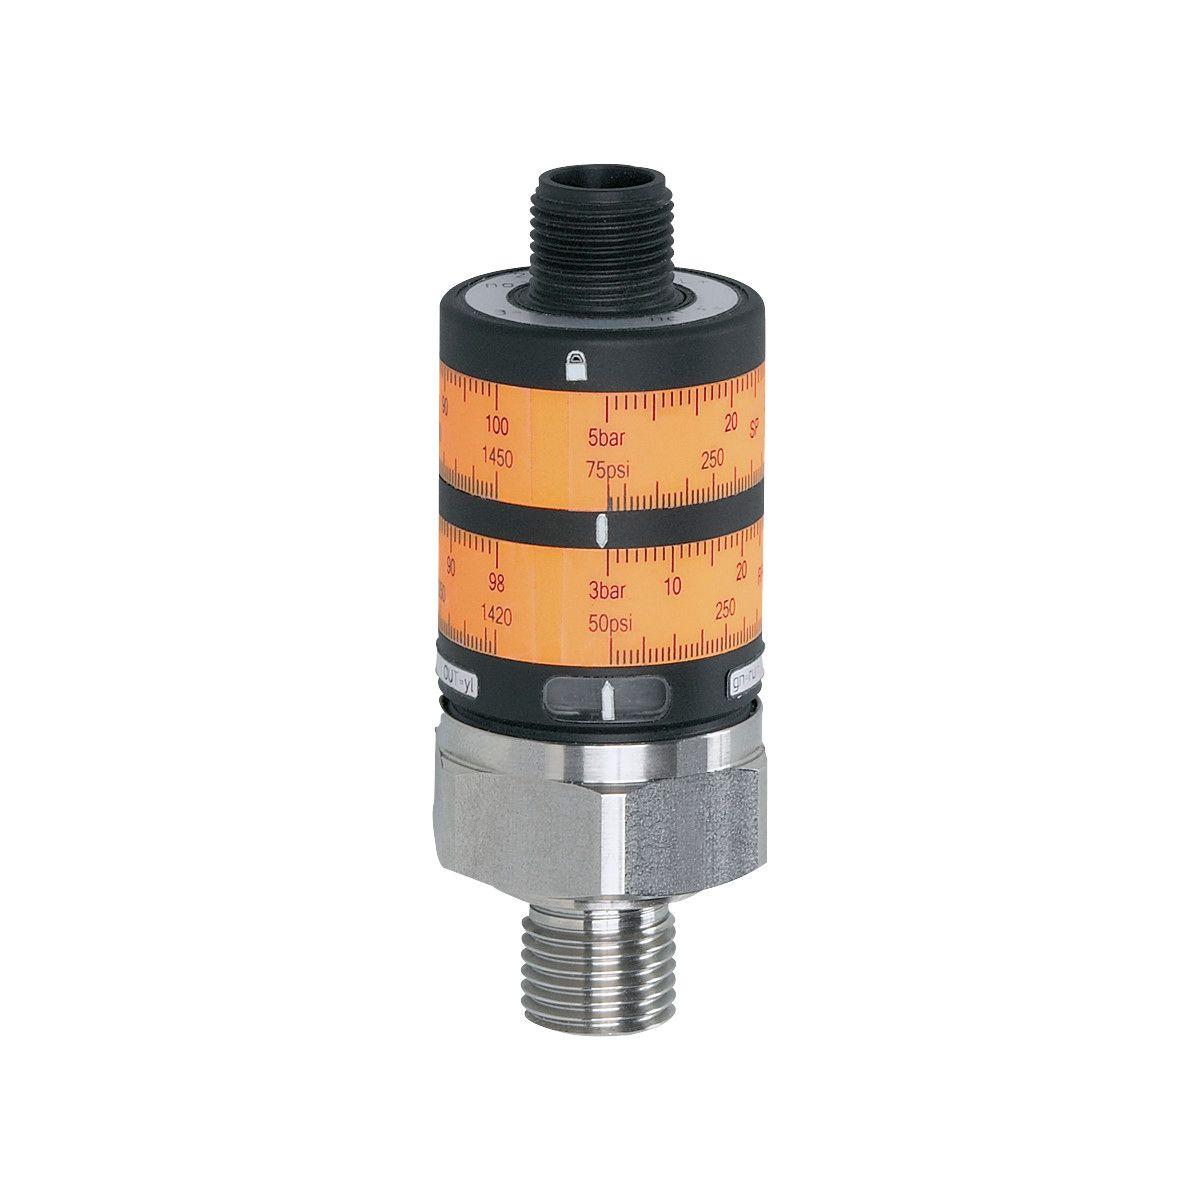 ifm Electronic PK6224 Pressure switch with intuitive switch point setting, Simple switch point setting by means of two setting rings allowing optimum reading, Output signal: switching signal, Measuring range: 0...10 bar 0...145 psi, Process connection: threaded connection 1/4"